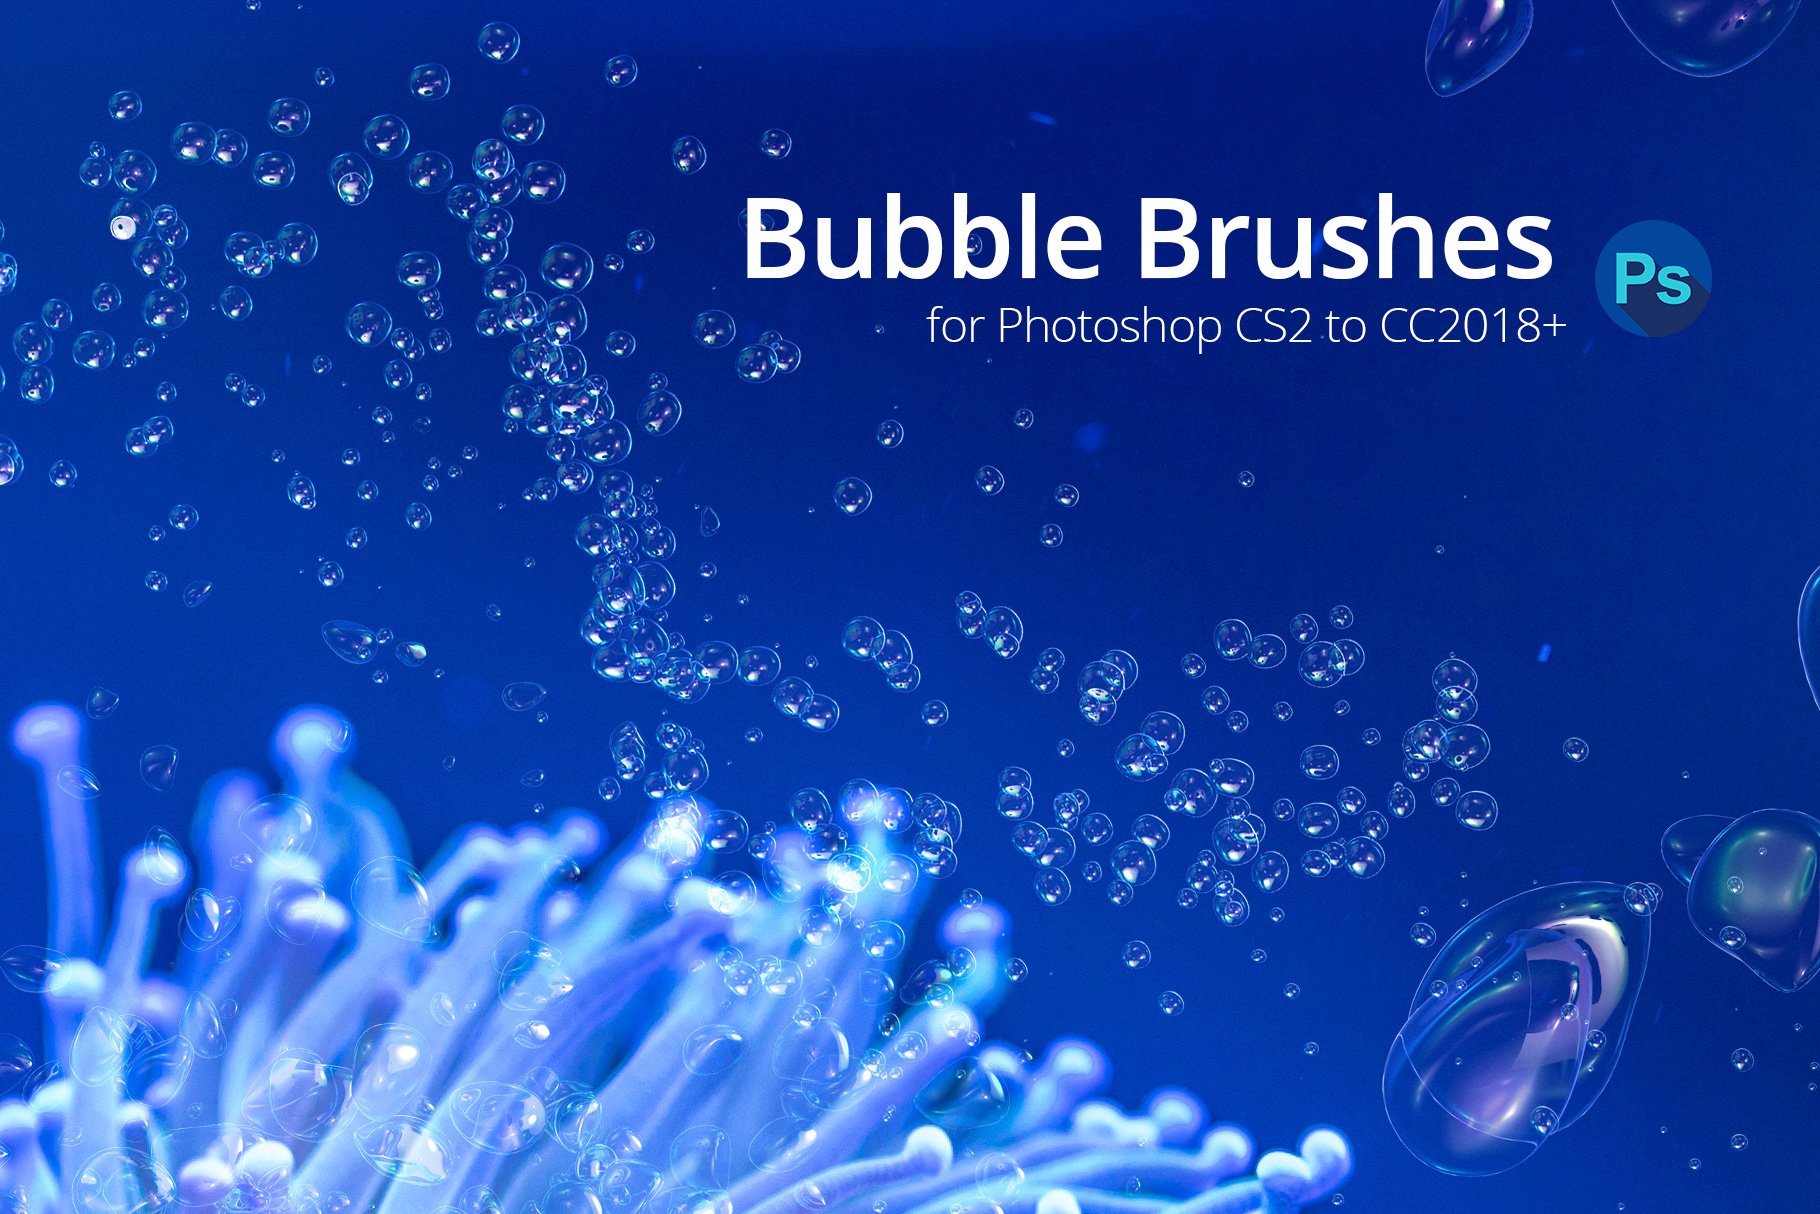 60 Bubble Brushes for Photoshoppreview image.